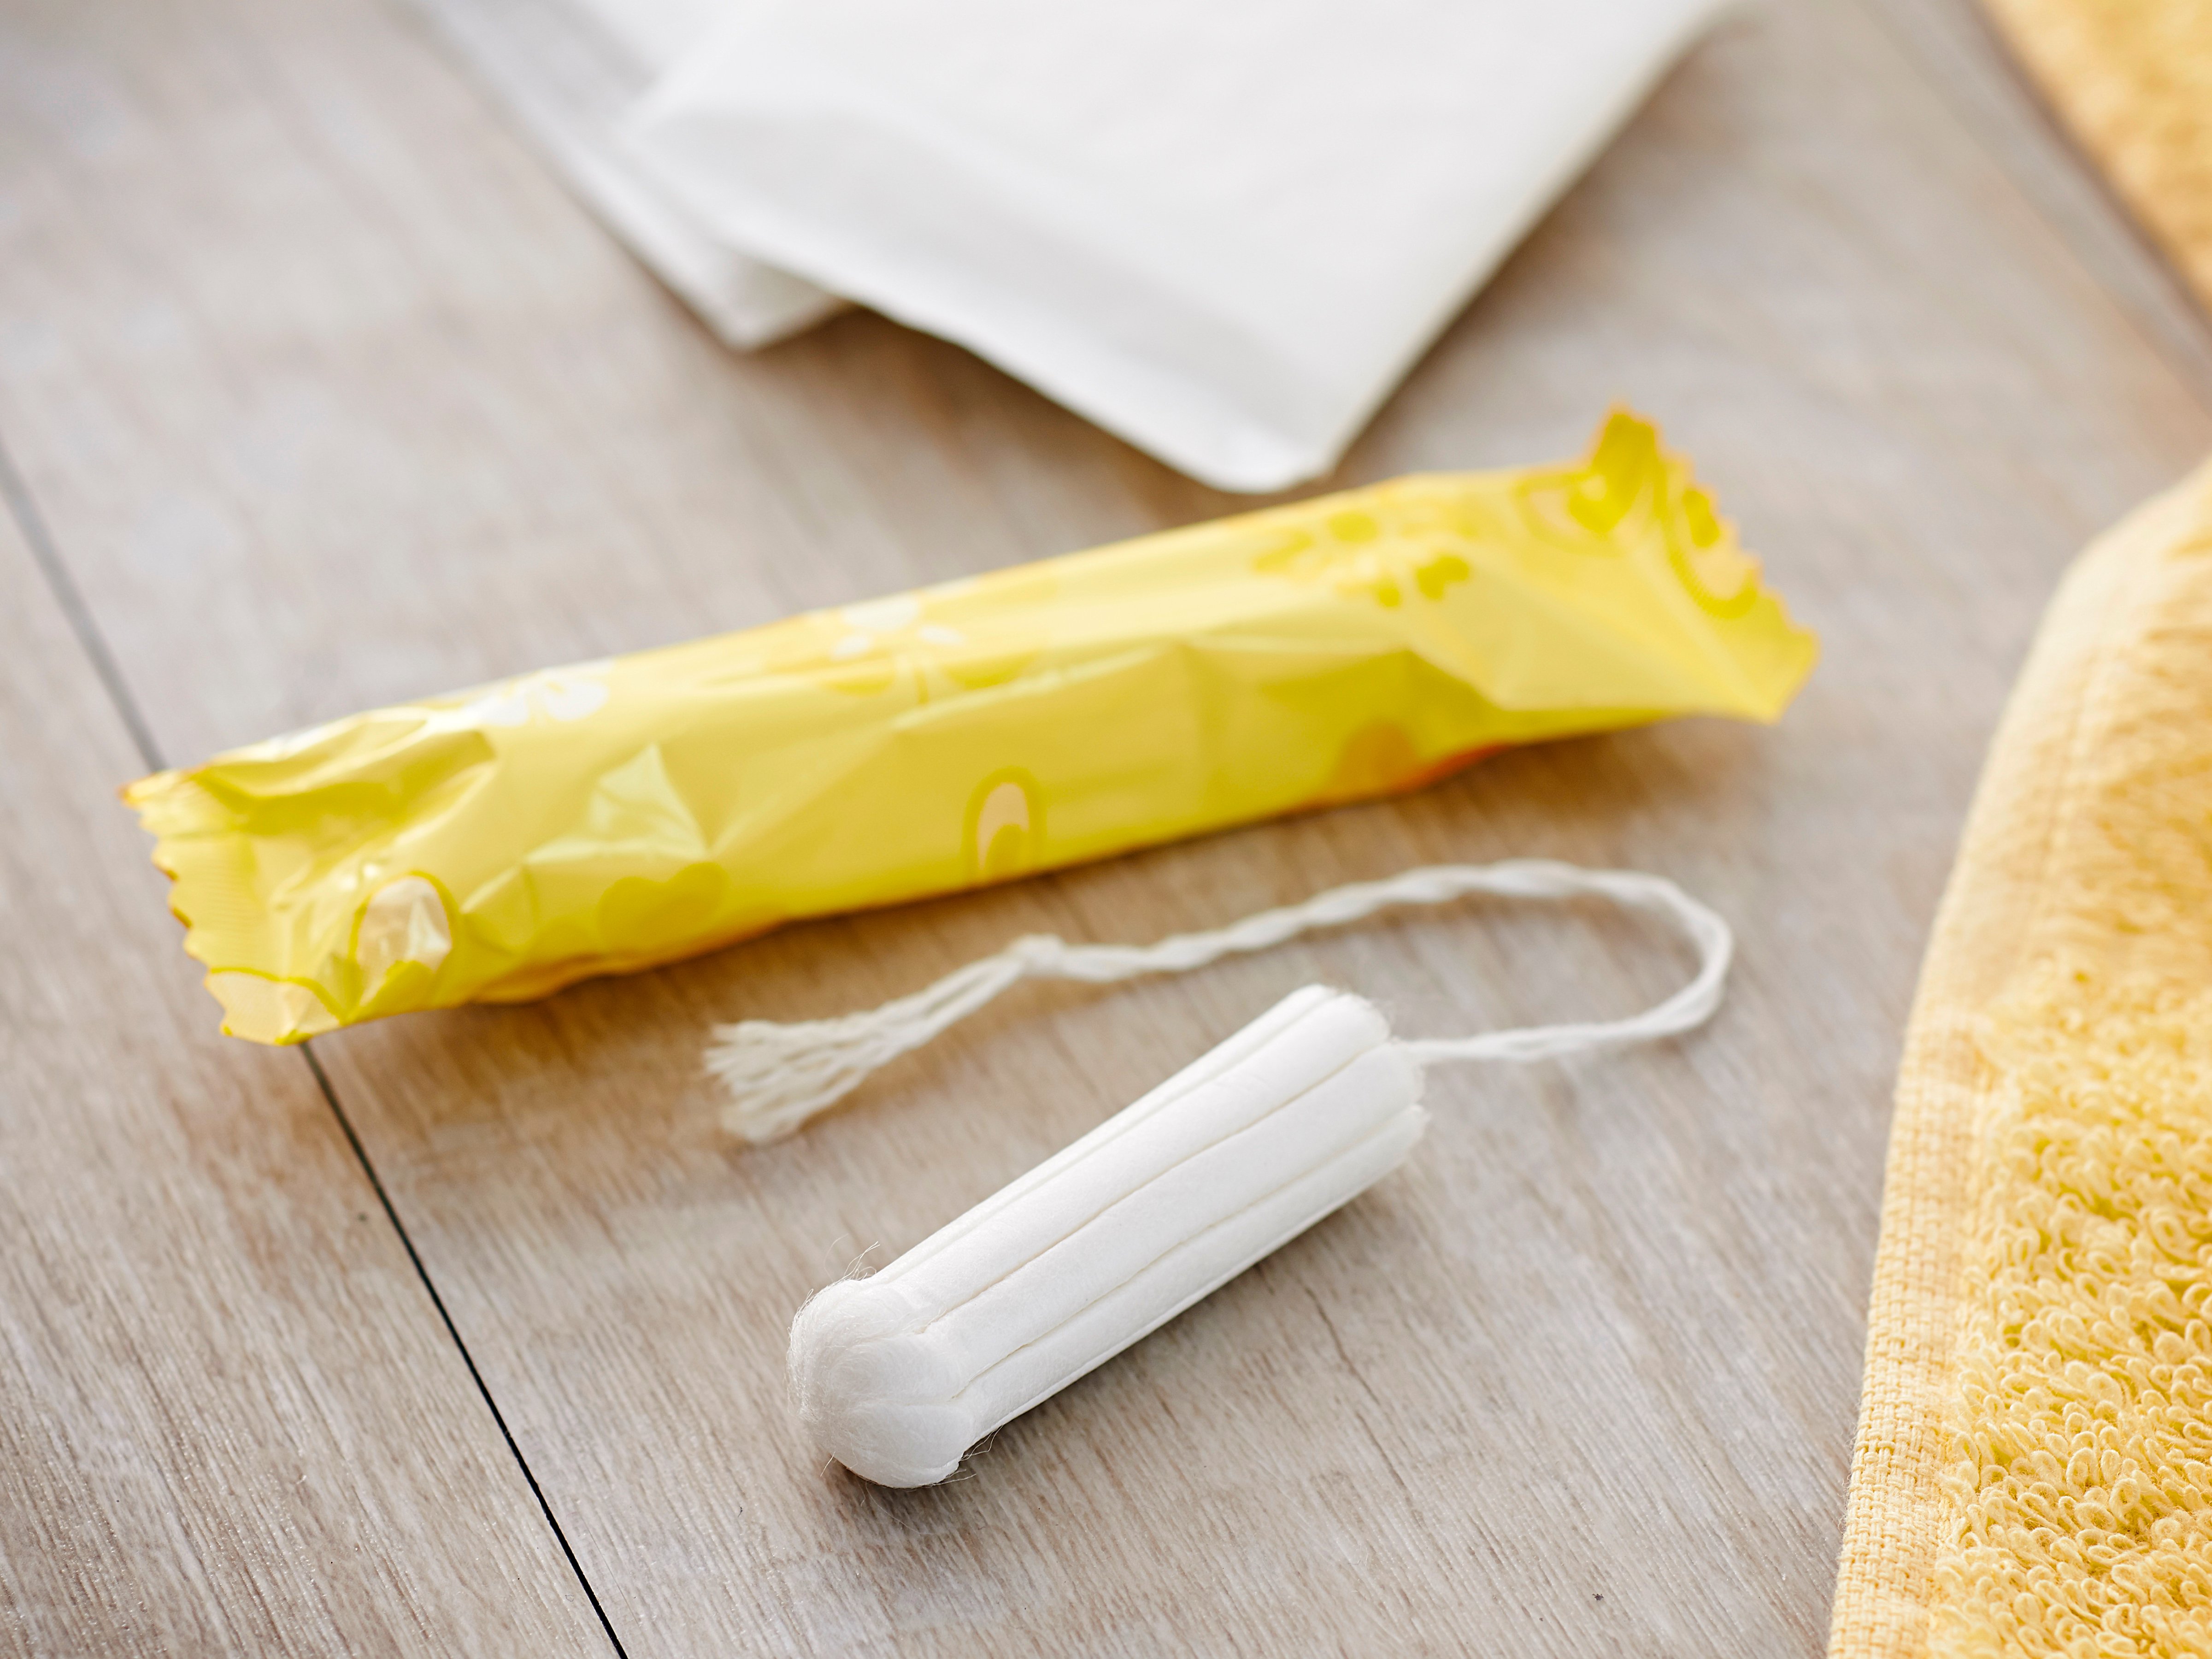 Tampons, pads and other feminine hygiene products will no longer be subject to a 10% tax in Australia. (BSIP/UIG/Getty Images)